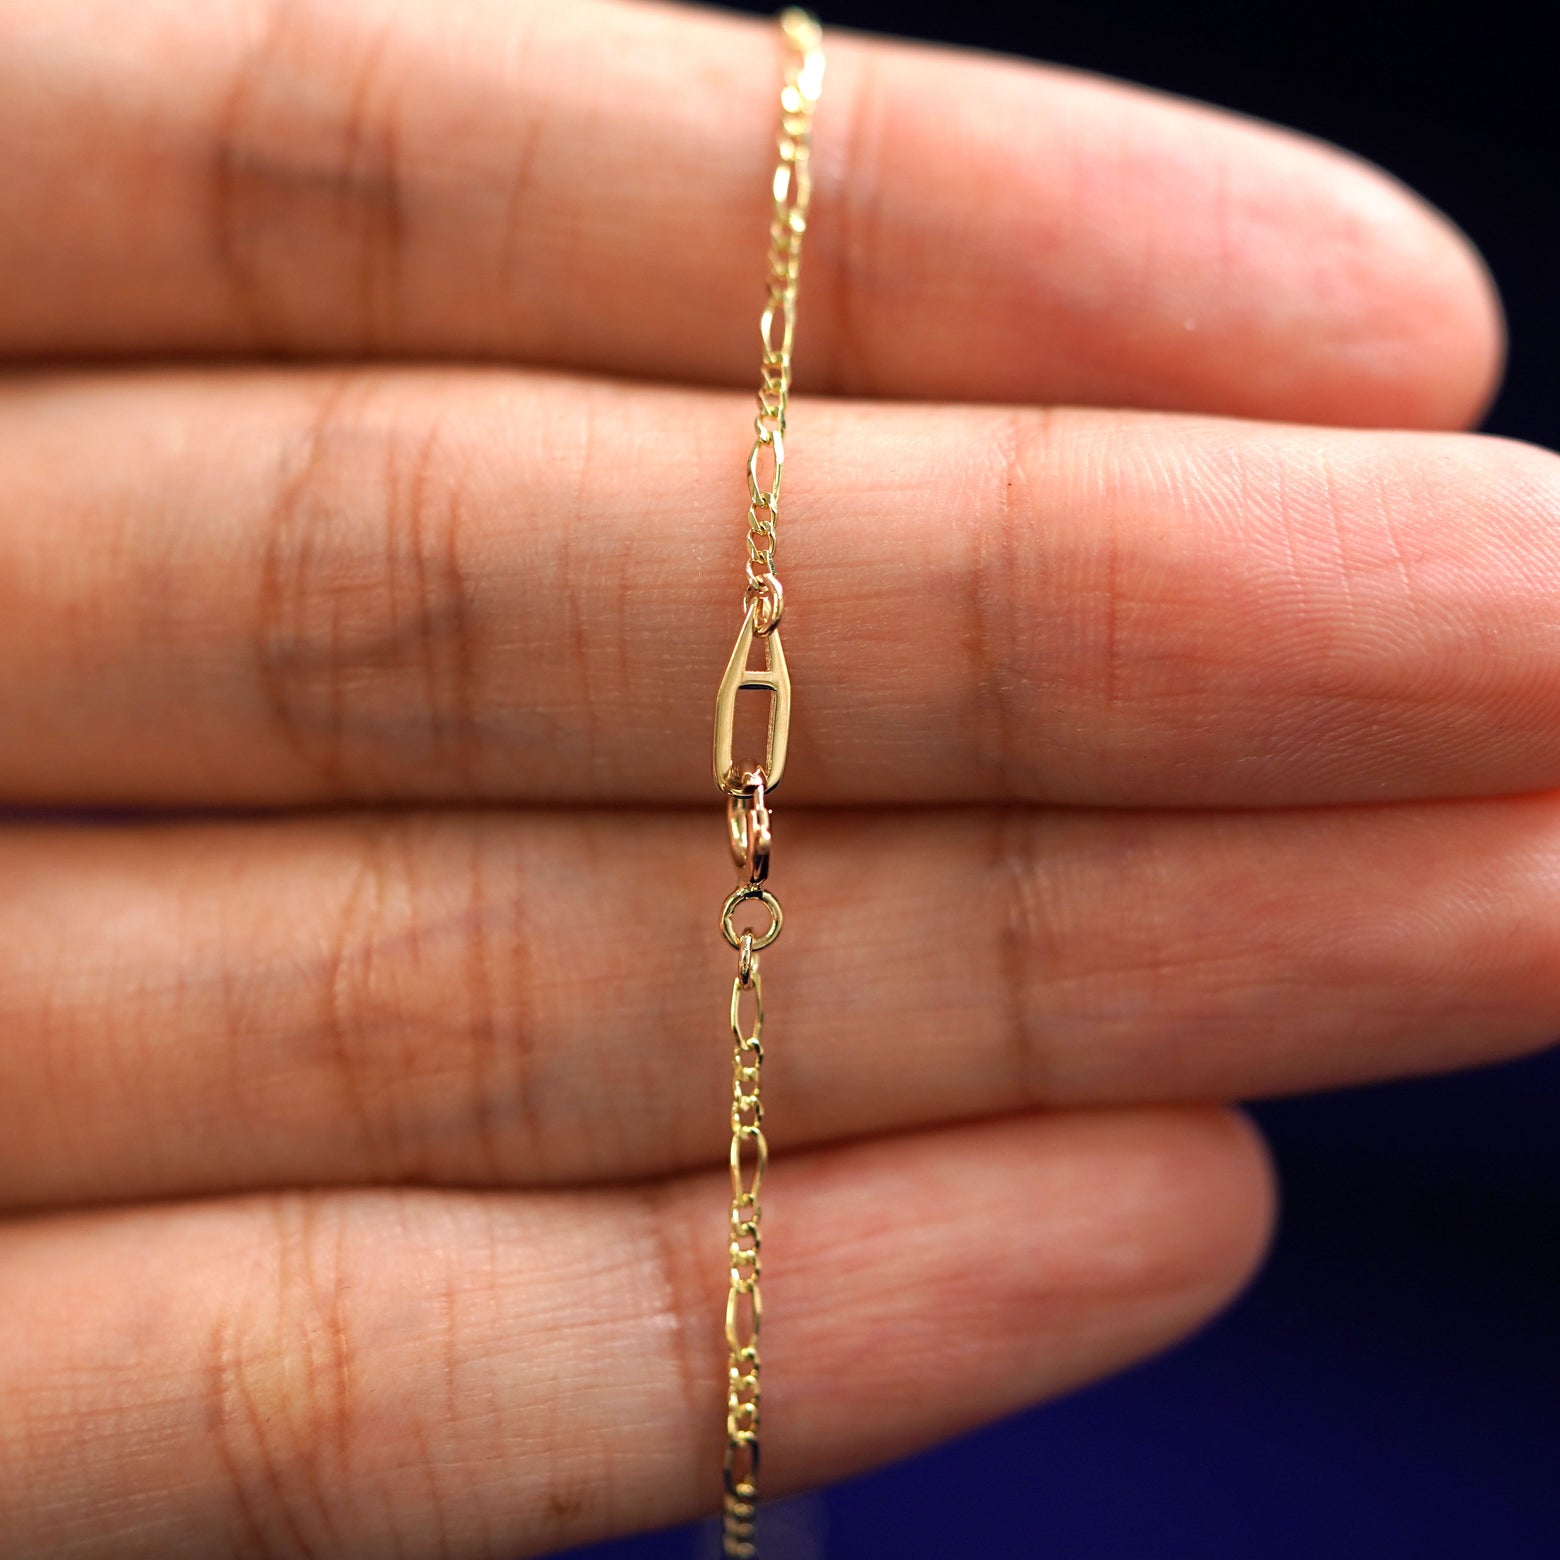 An Automic Gold AU spring ring clasp on a Figaro Chain